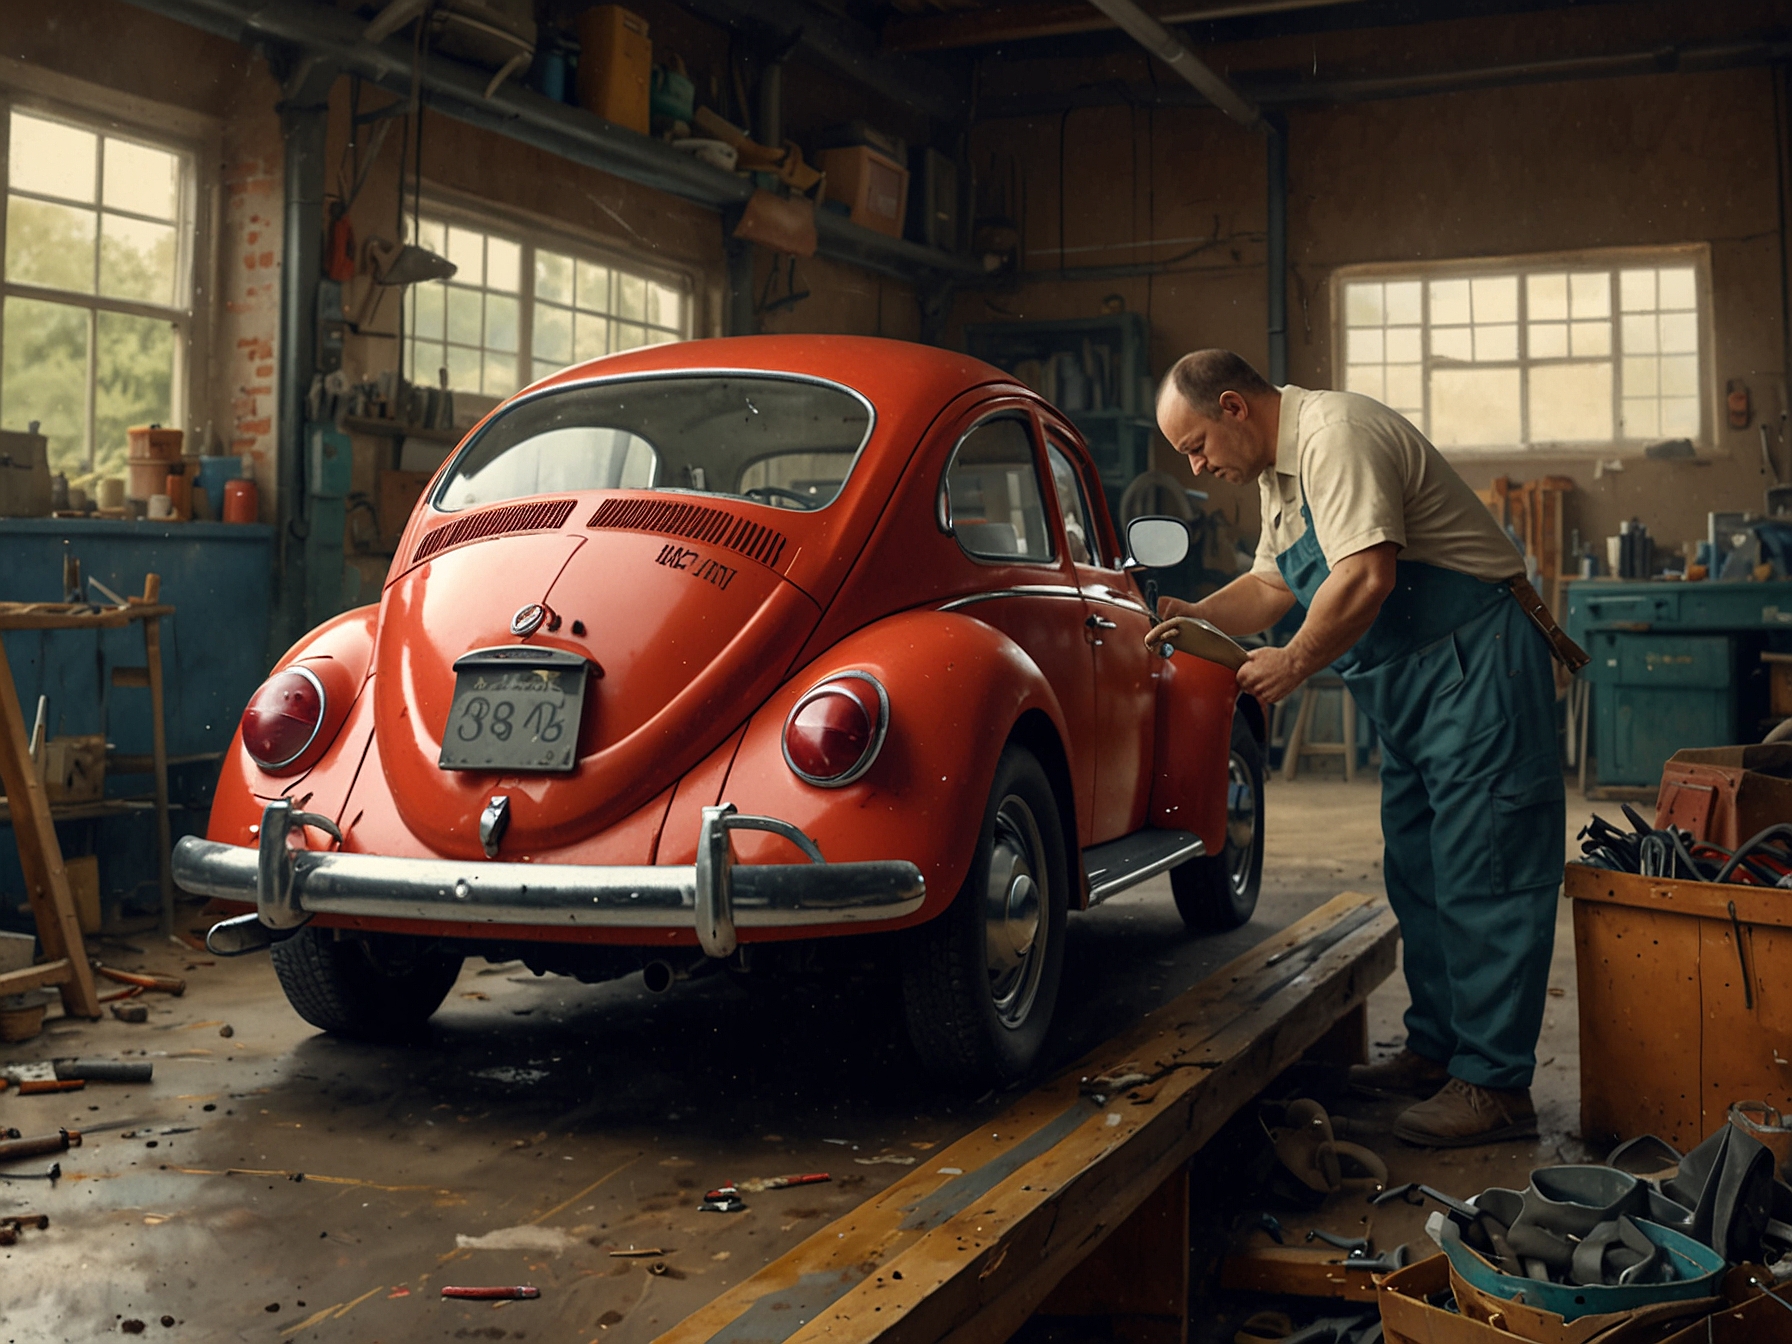 A local mechanic expertly works on a Volkswagen Beetle, highlighting the skilled craftsmanship and dedication of the community in keeping these classic cars roadworthy and visually appealing.